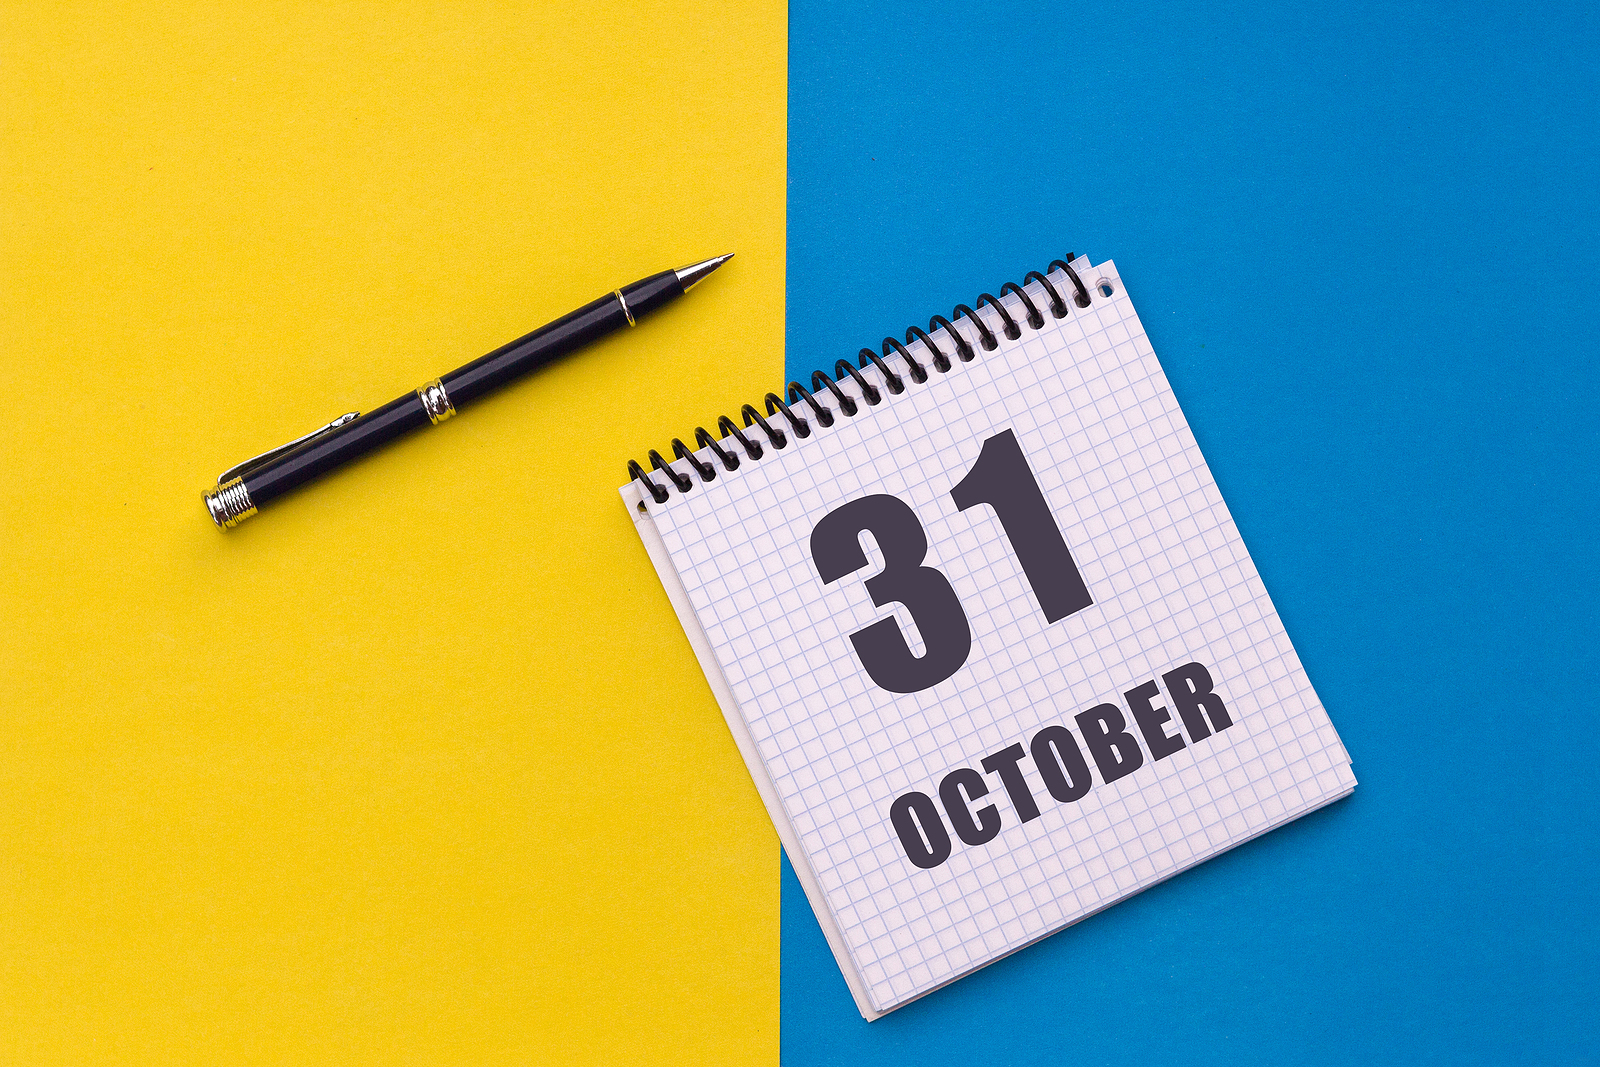 31 October Tax Deadline – Are You Ready